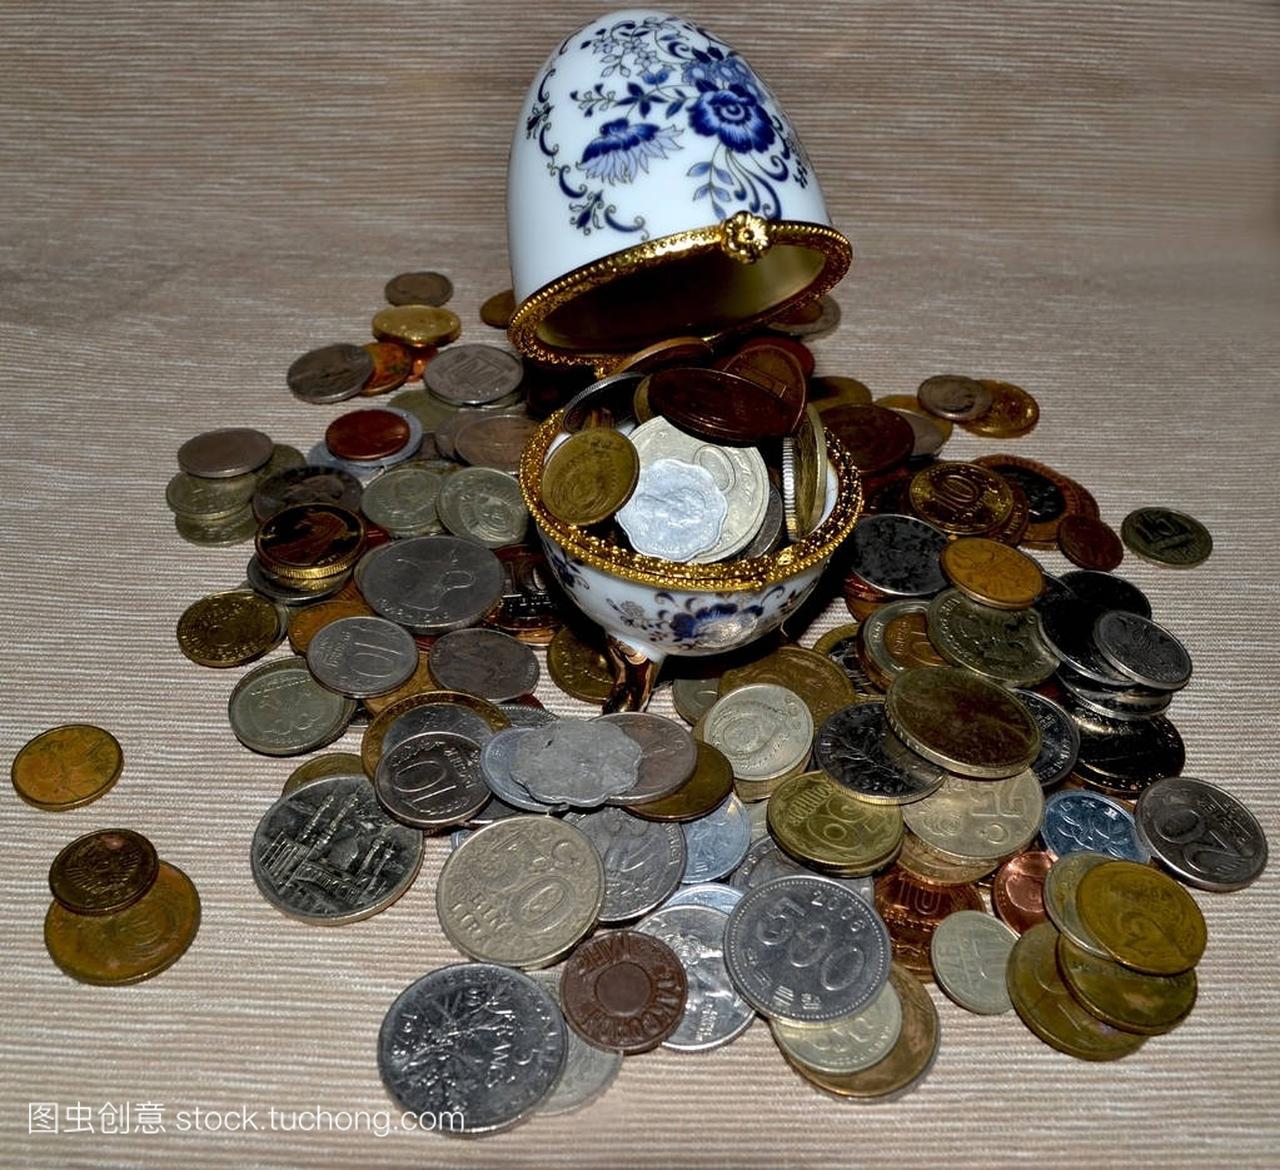 A scatter of coins and a white and blue box in th